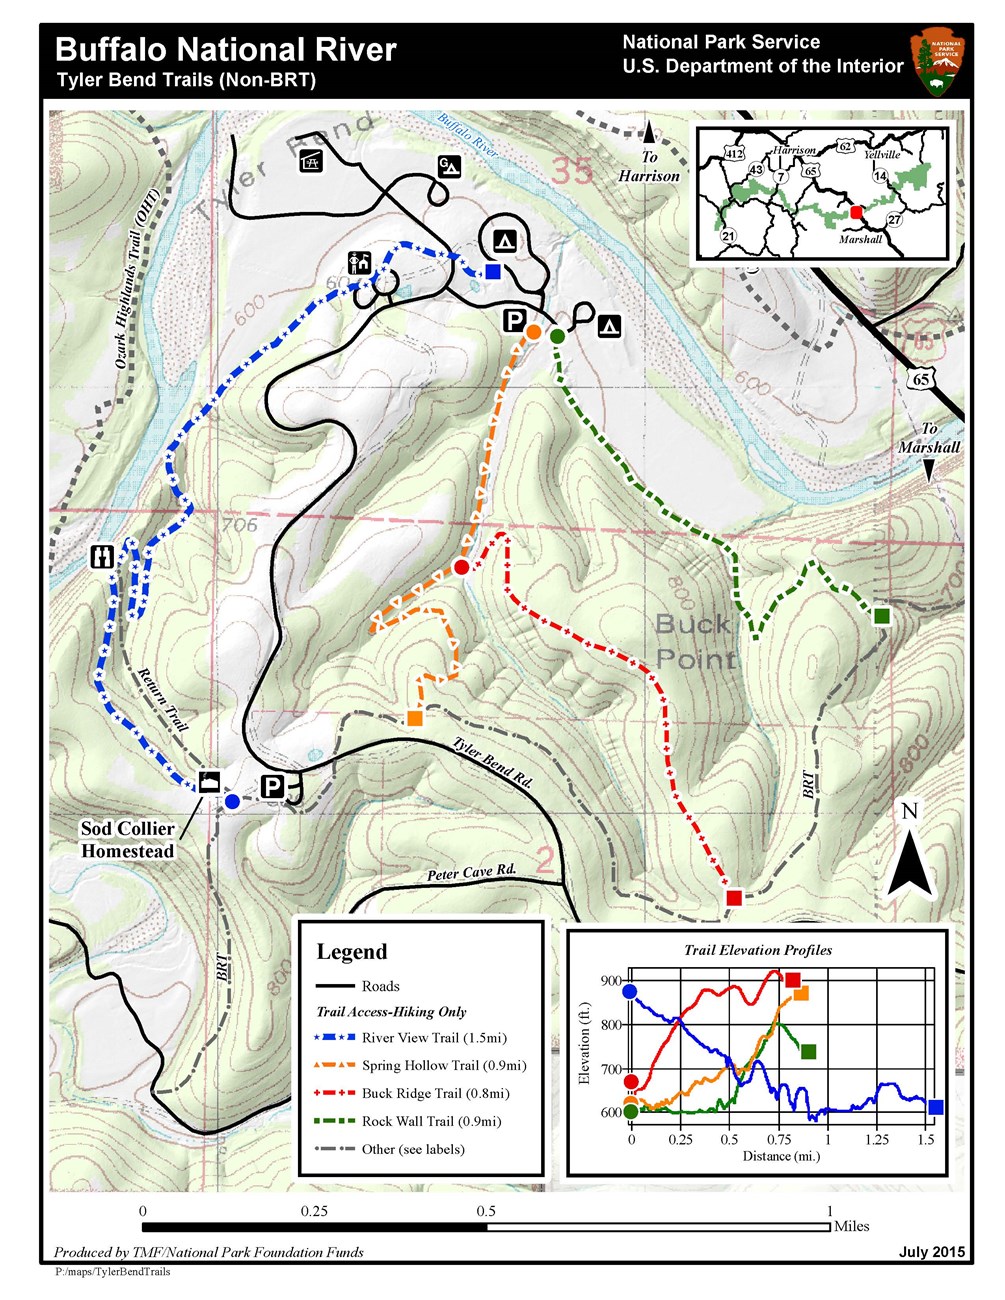 Topographic map of the Tyler Bend hiking trails.